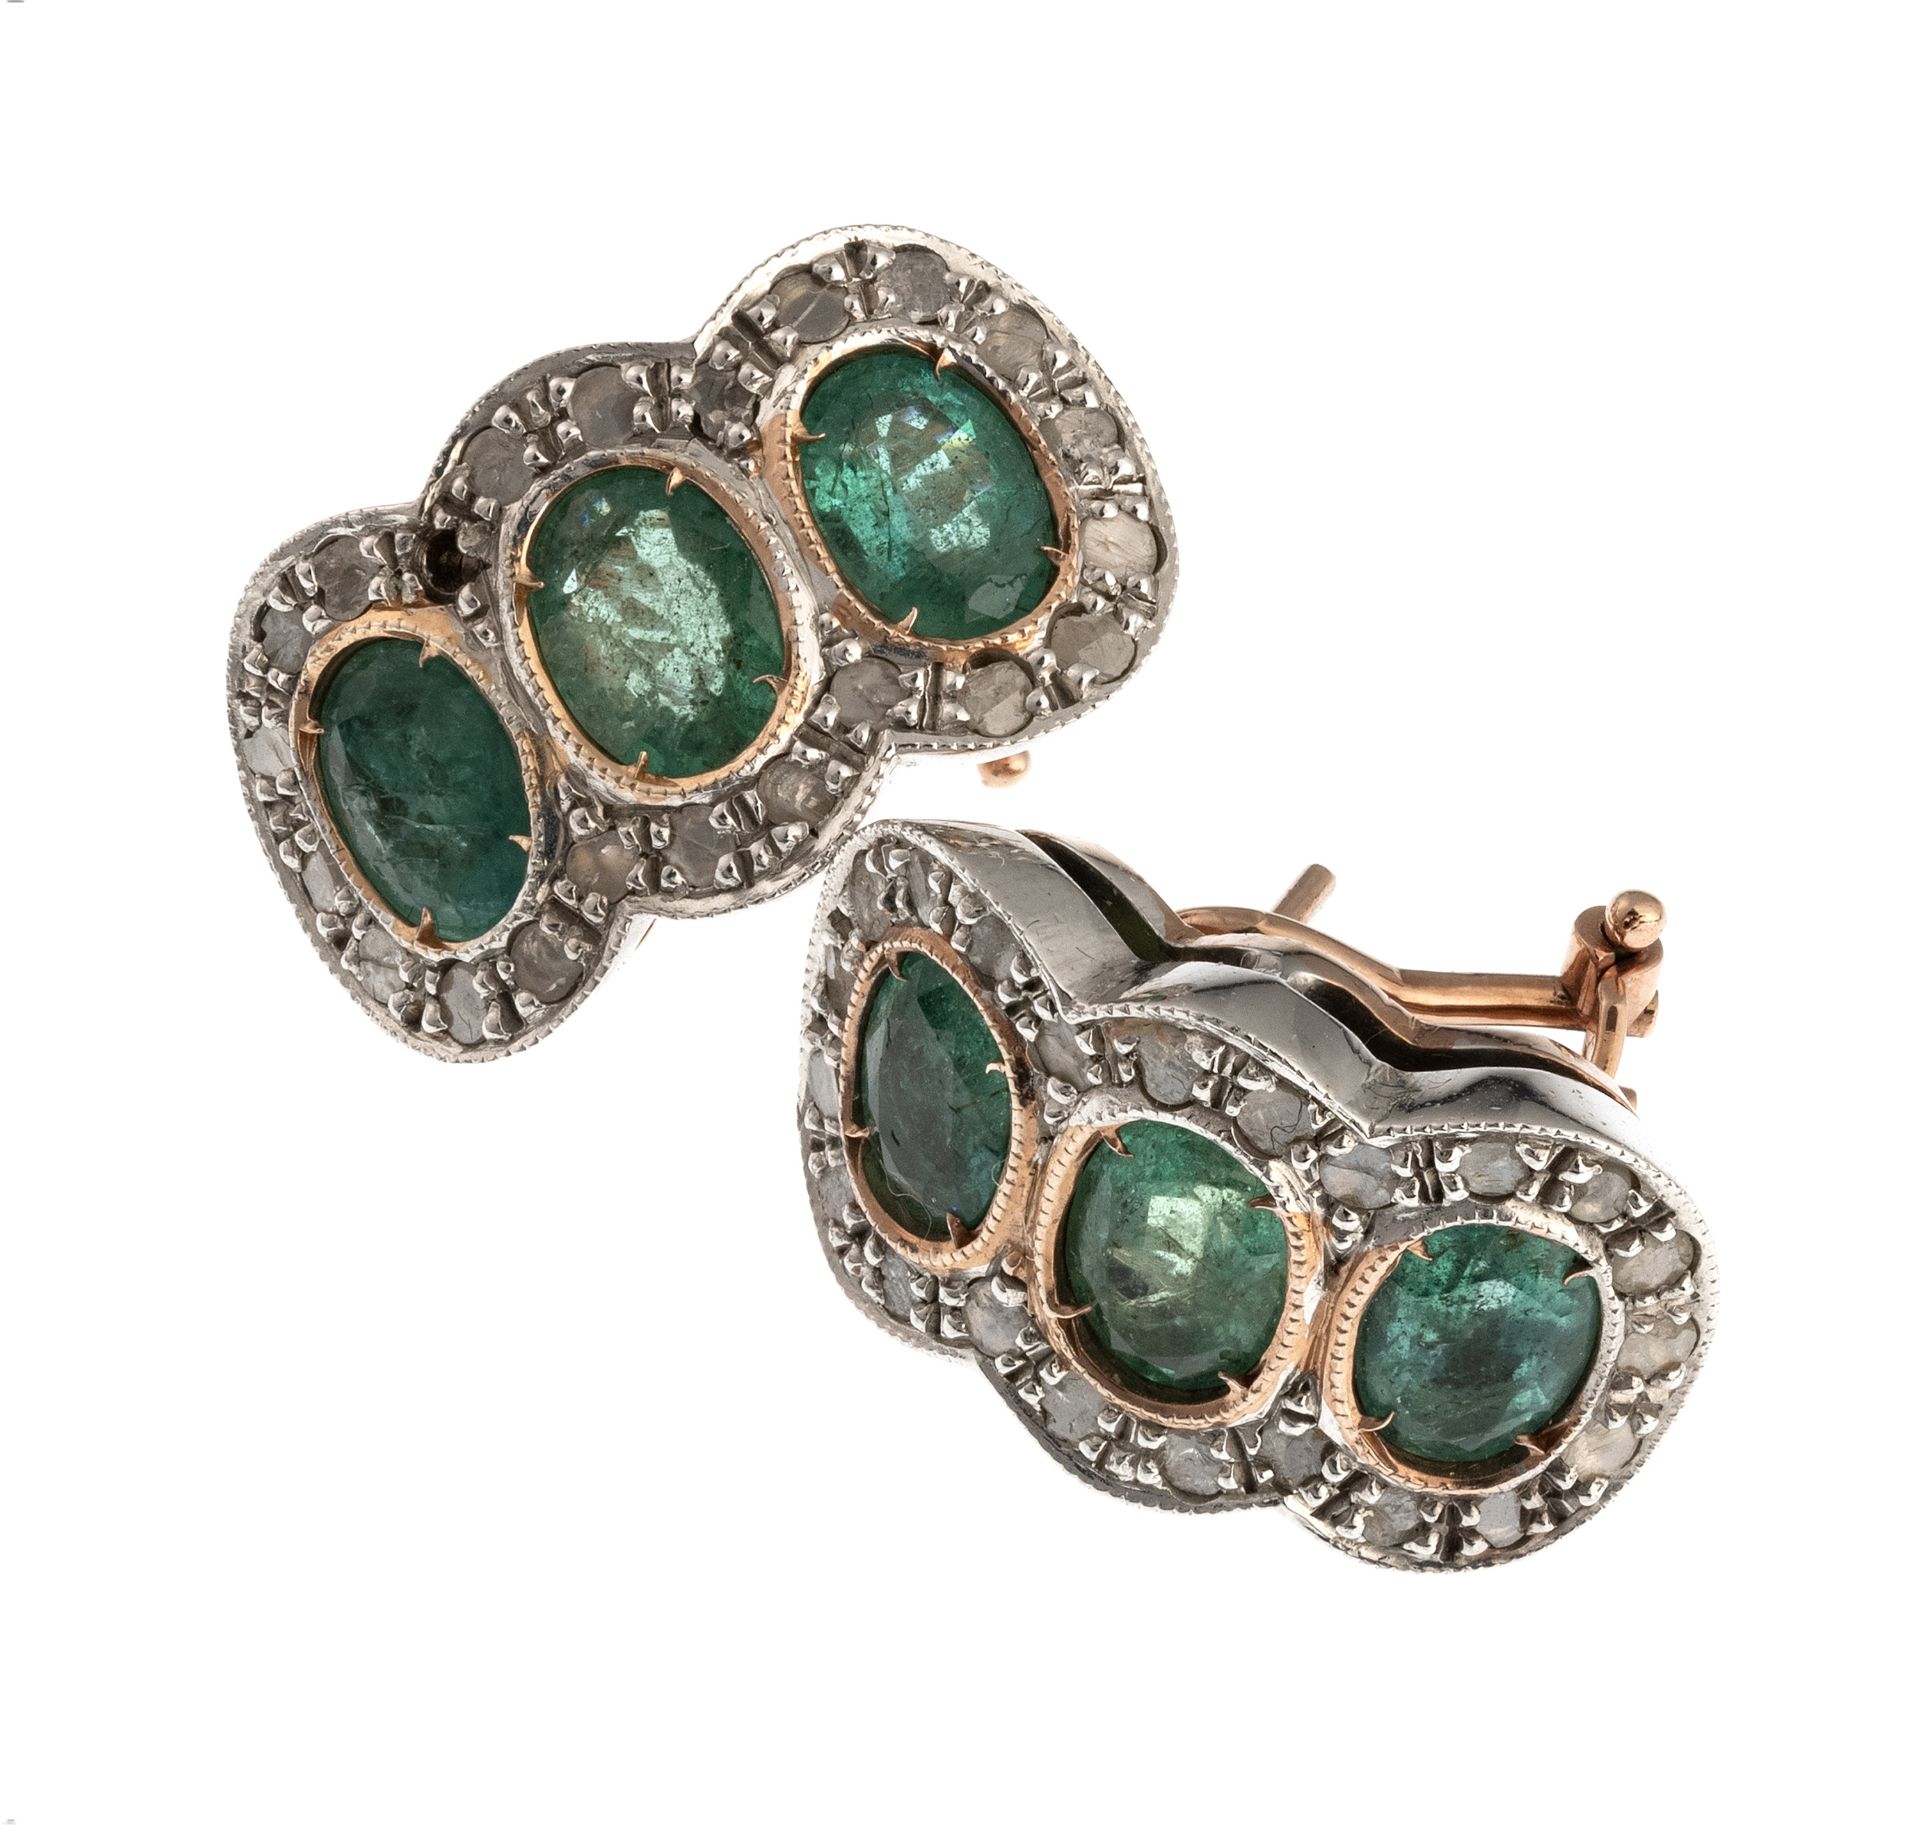 WHITE GOLD EARRINGS WITH EMERALDS AND DIAMONDS